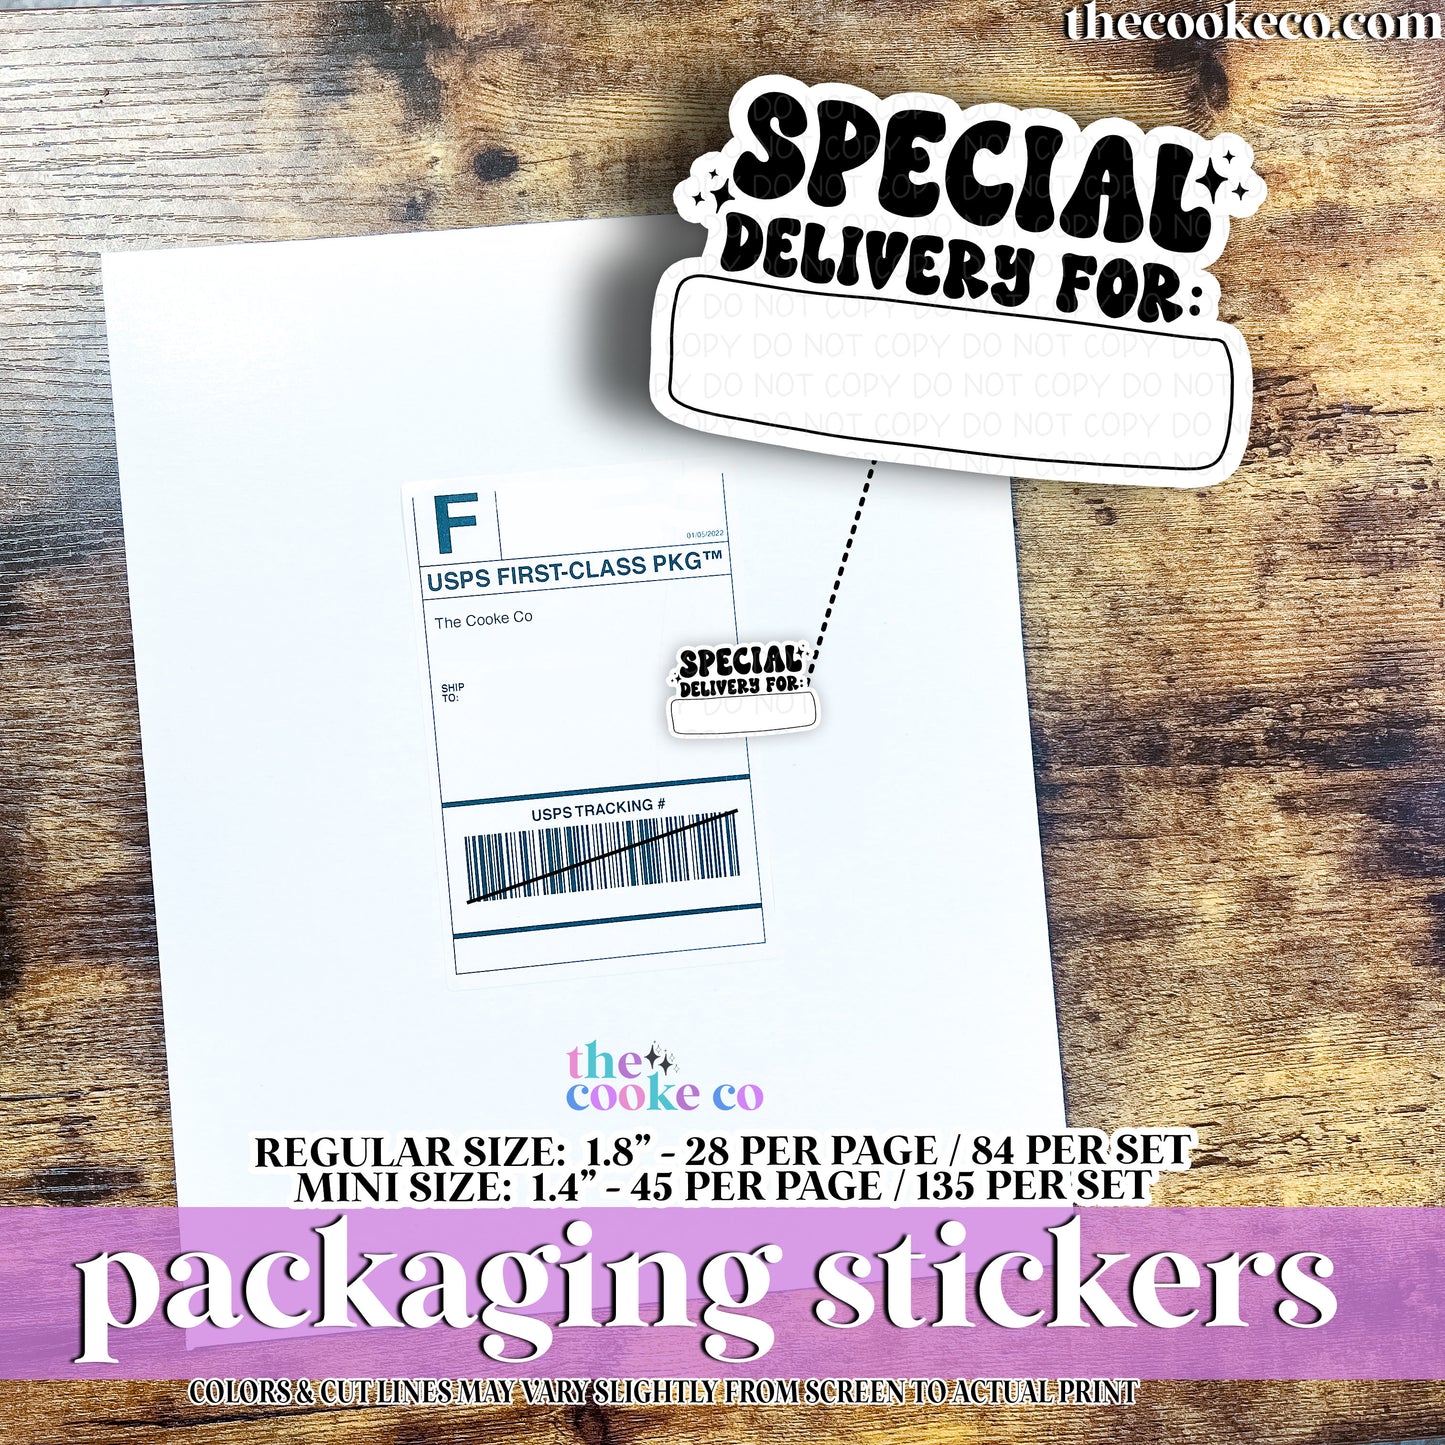 Packaging Stickers | #BW0245 - SPECIAL DELIVERY FOR